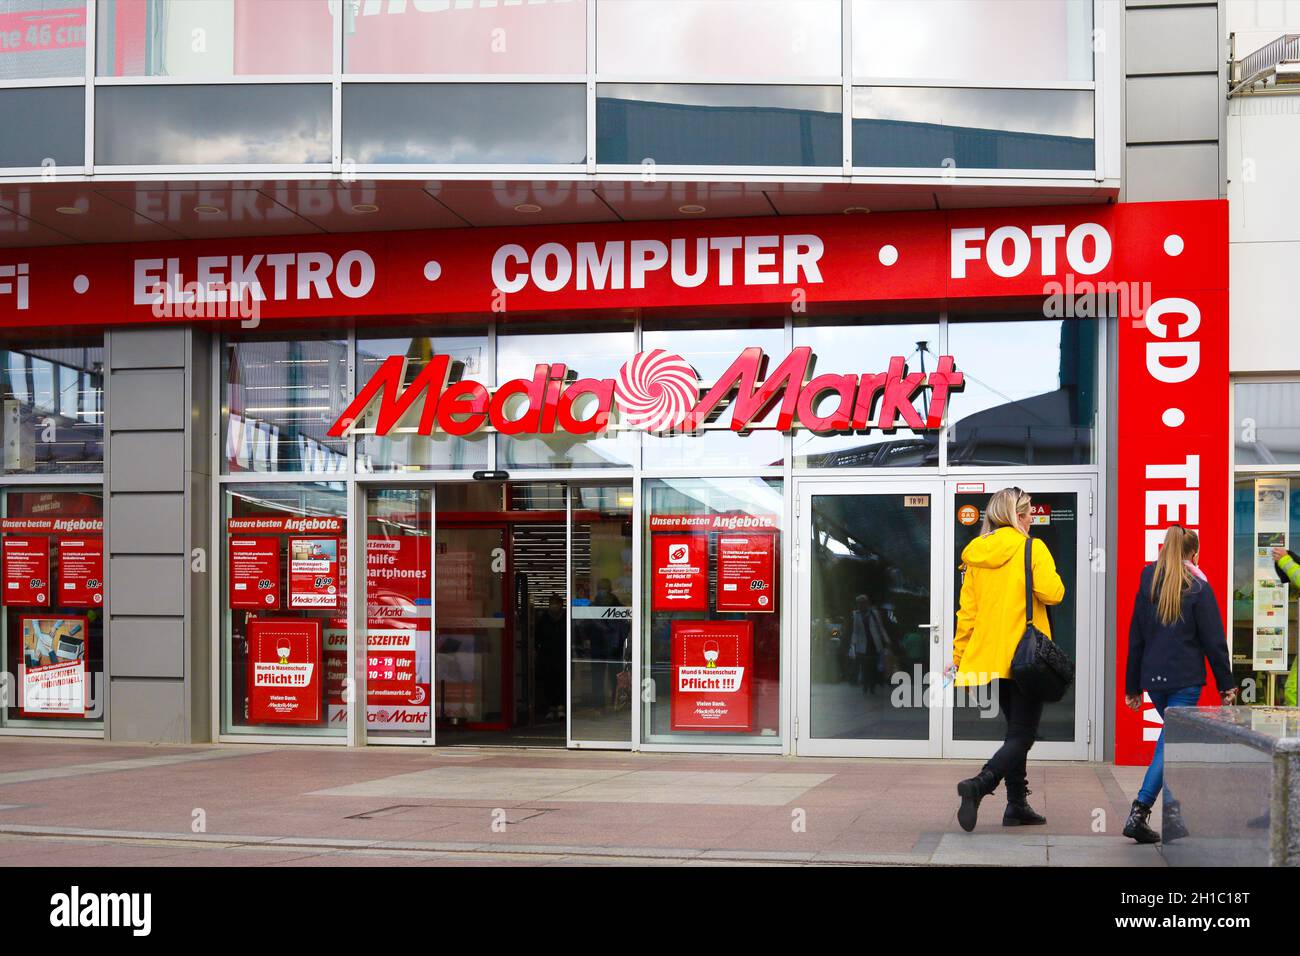 Entry of a Media Markt store. Electronics shop. Media Markt is a German multinational chain of stores selling consumer electronics. Stock Photo